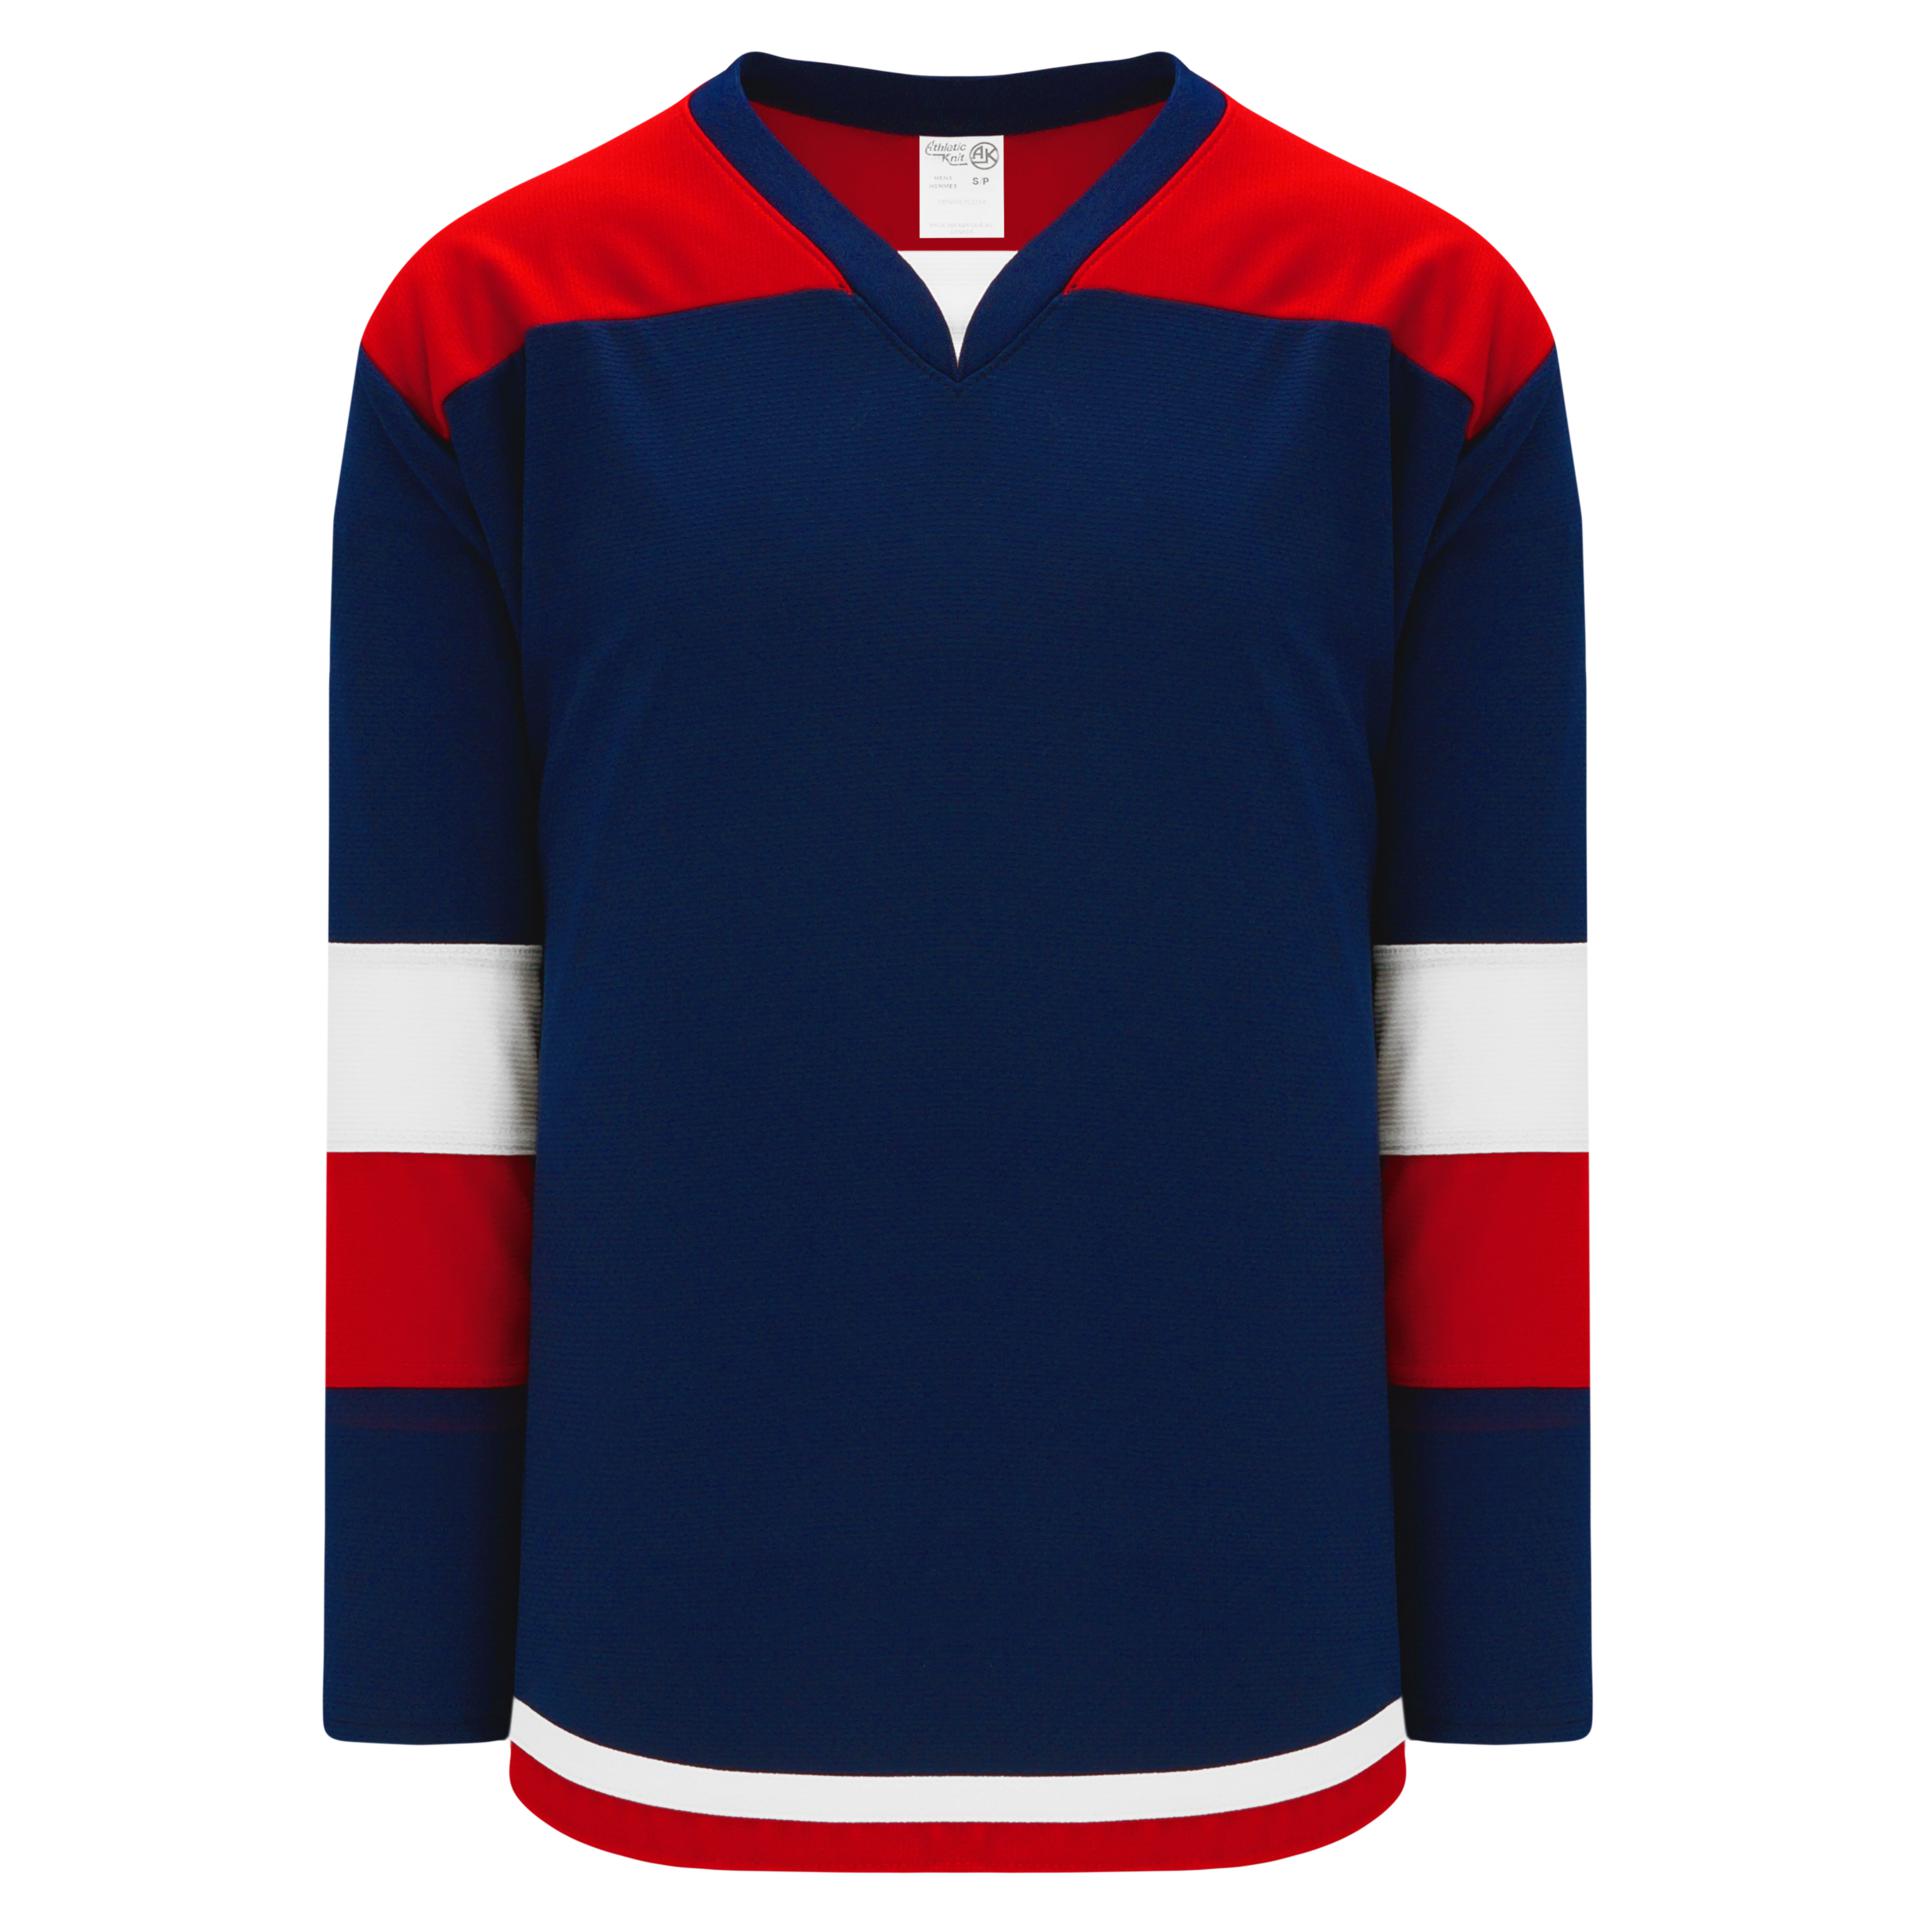 blue white red jersey